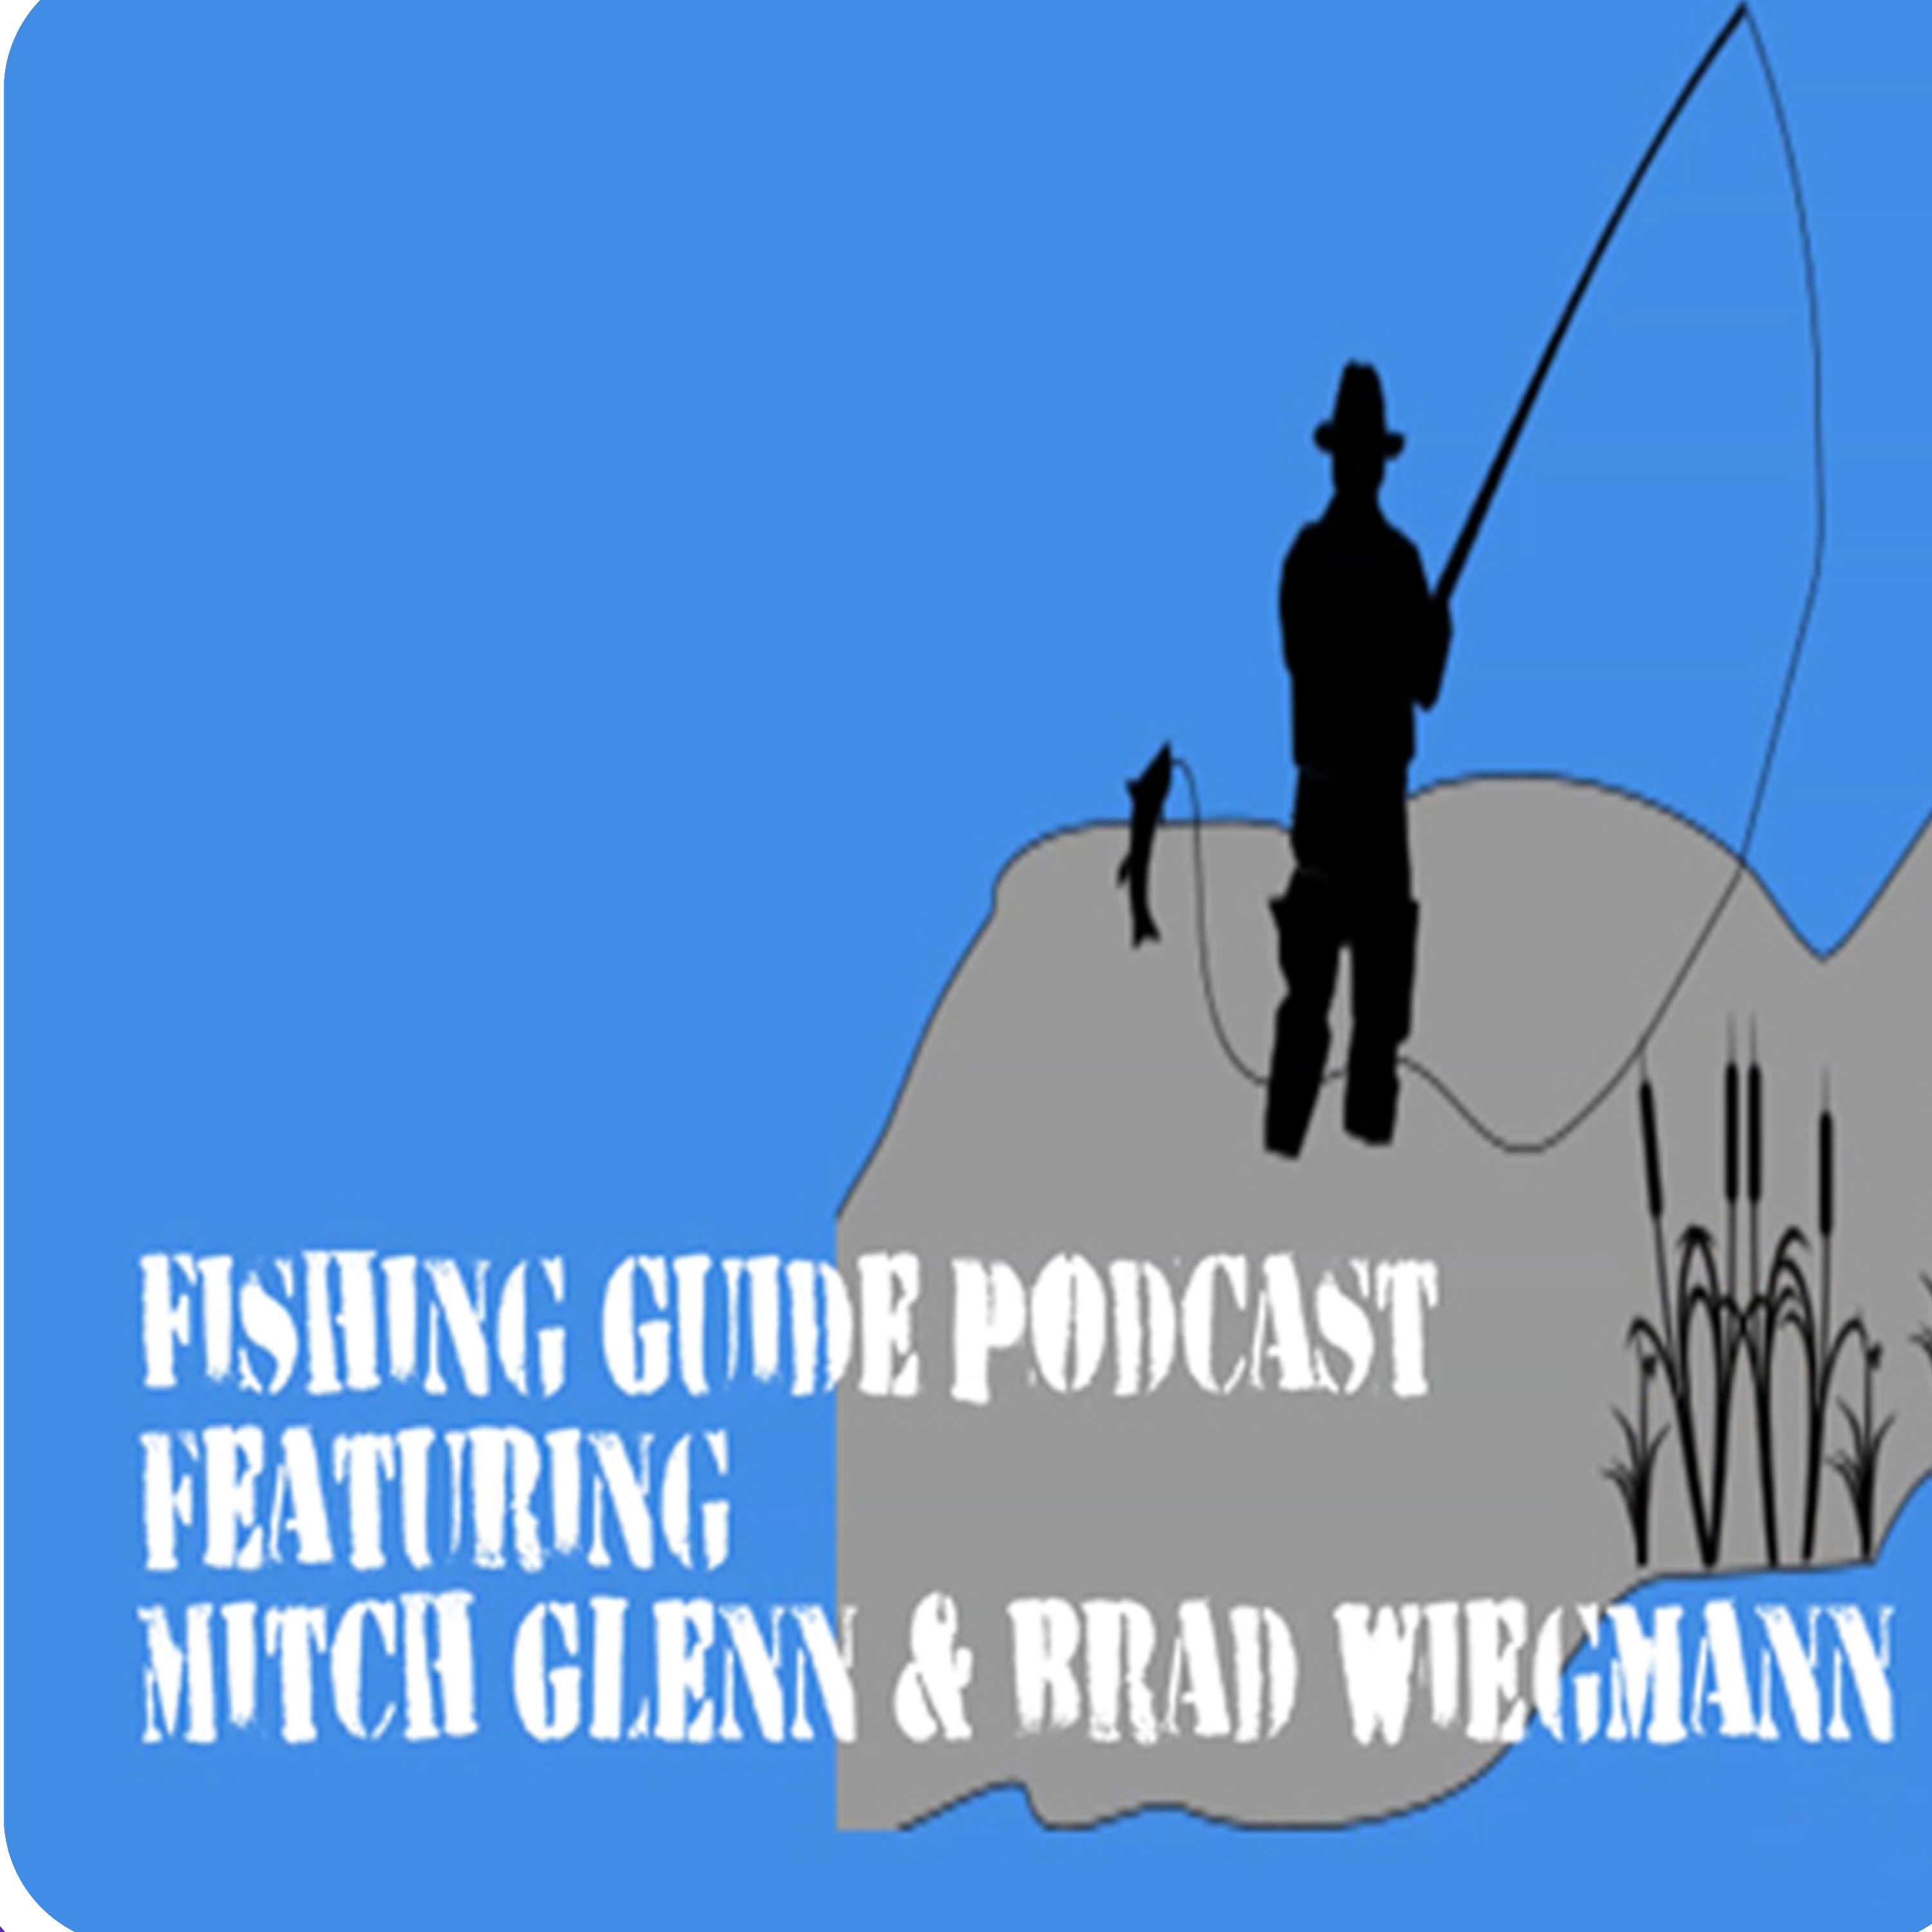 The Fishing Guide Podcast